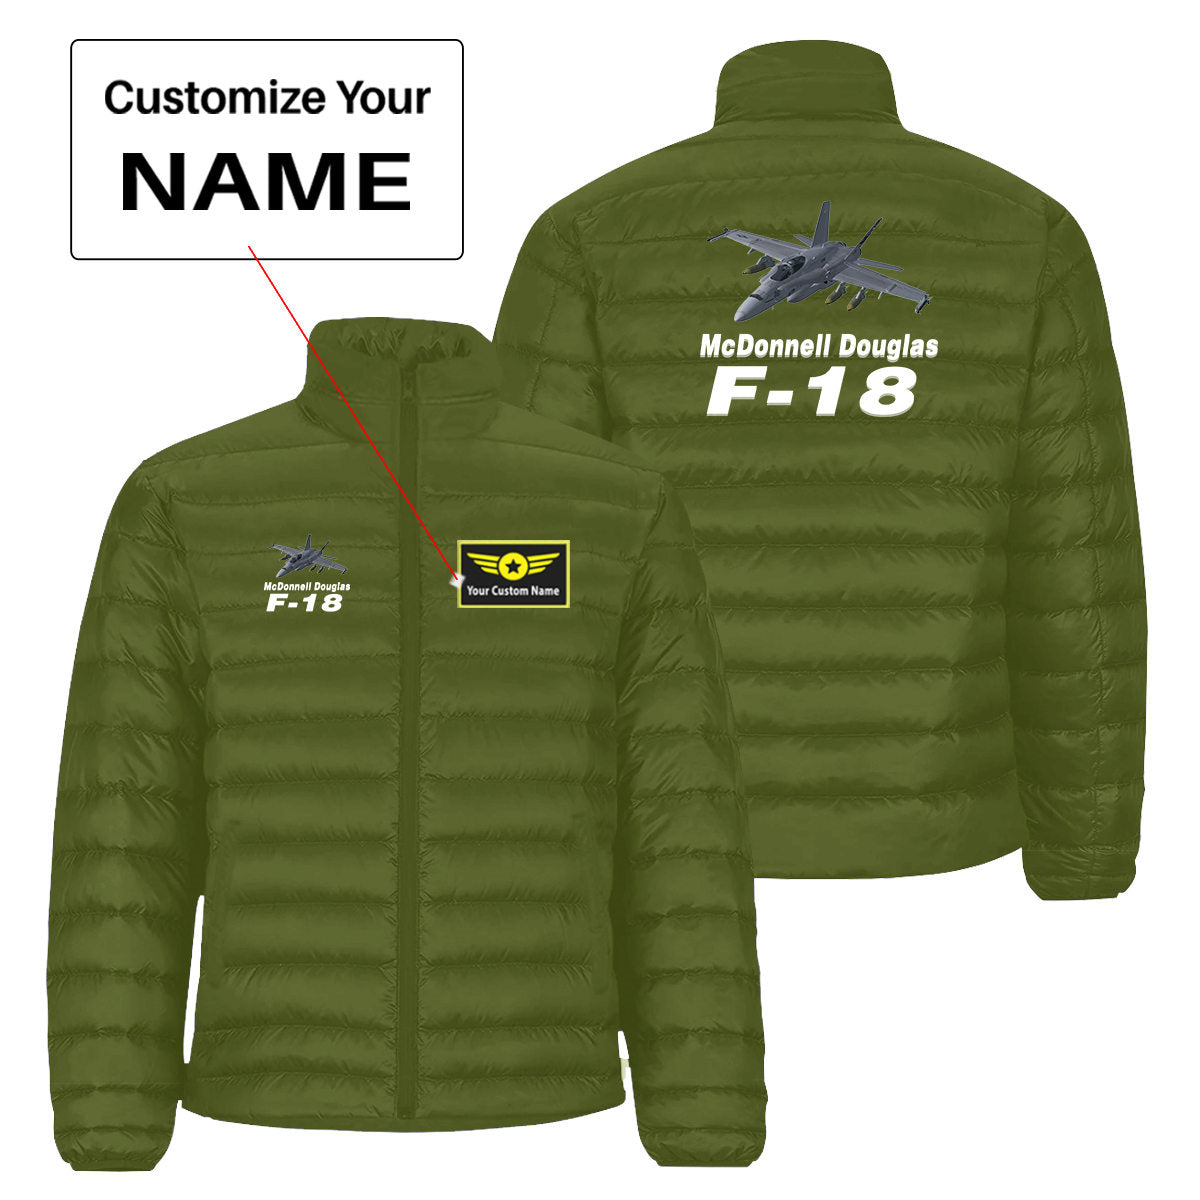 The McDonnell Douglas F18 Designed Padded Jackets